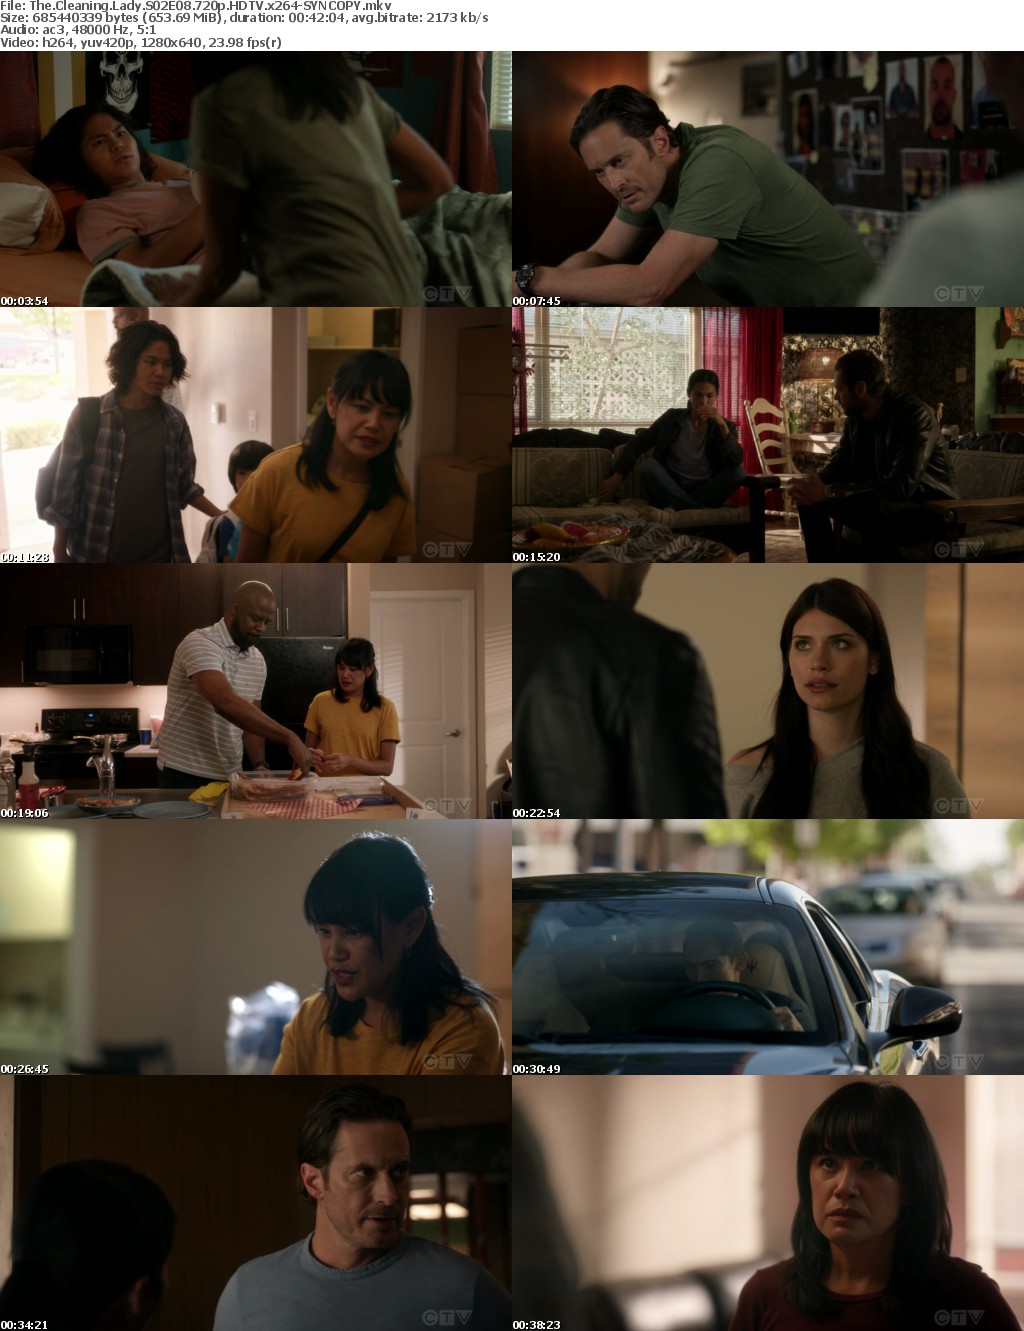 The Cleaning Lady S02E08 720p HDTV x264-SYNCOPY